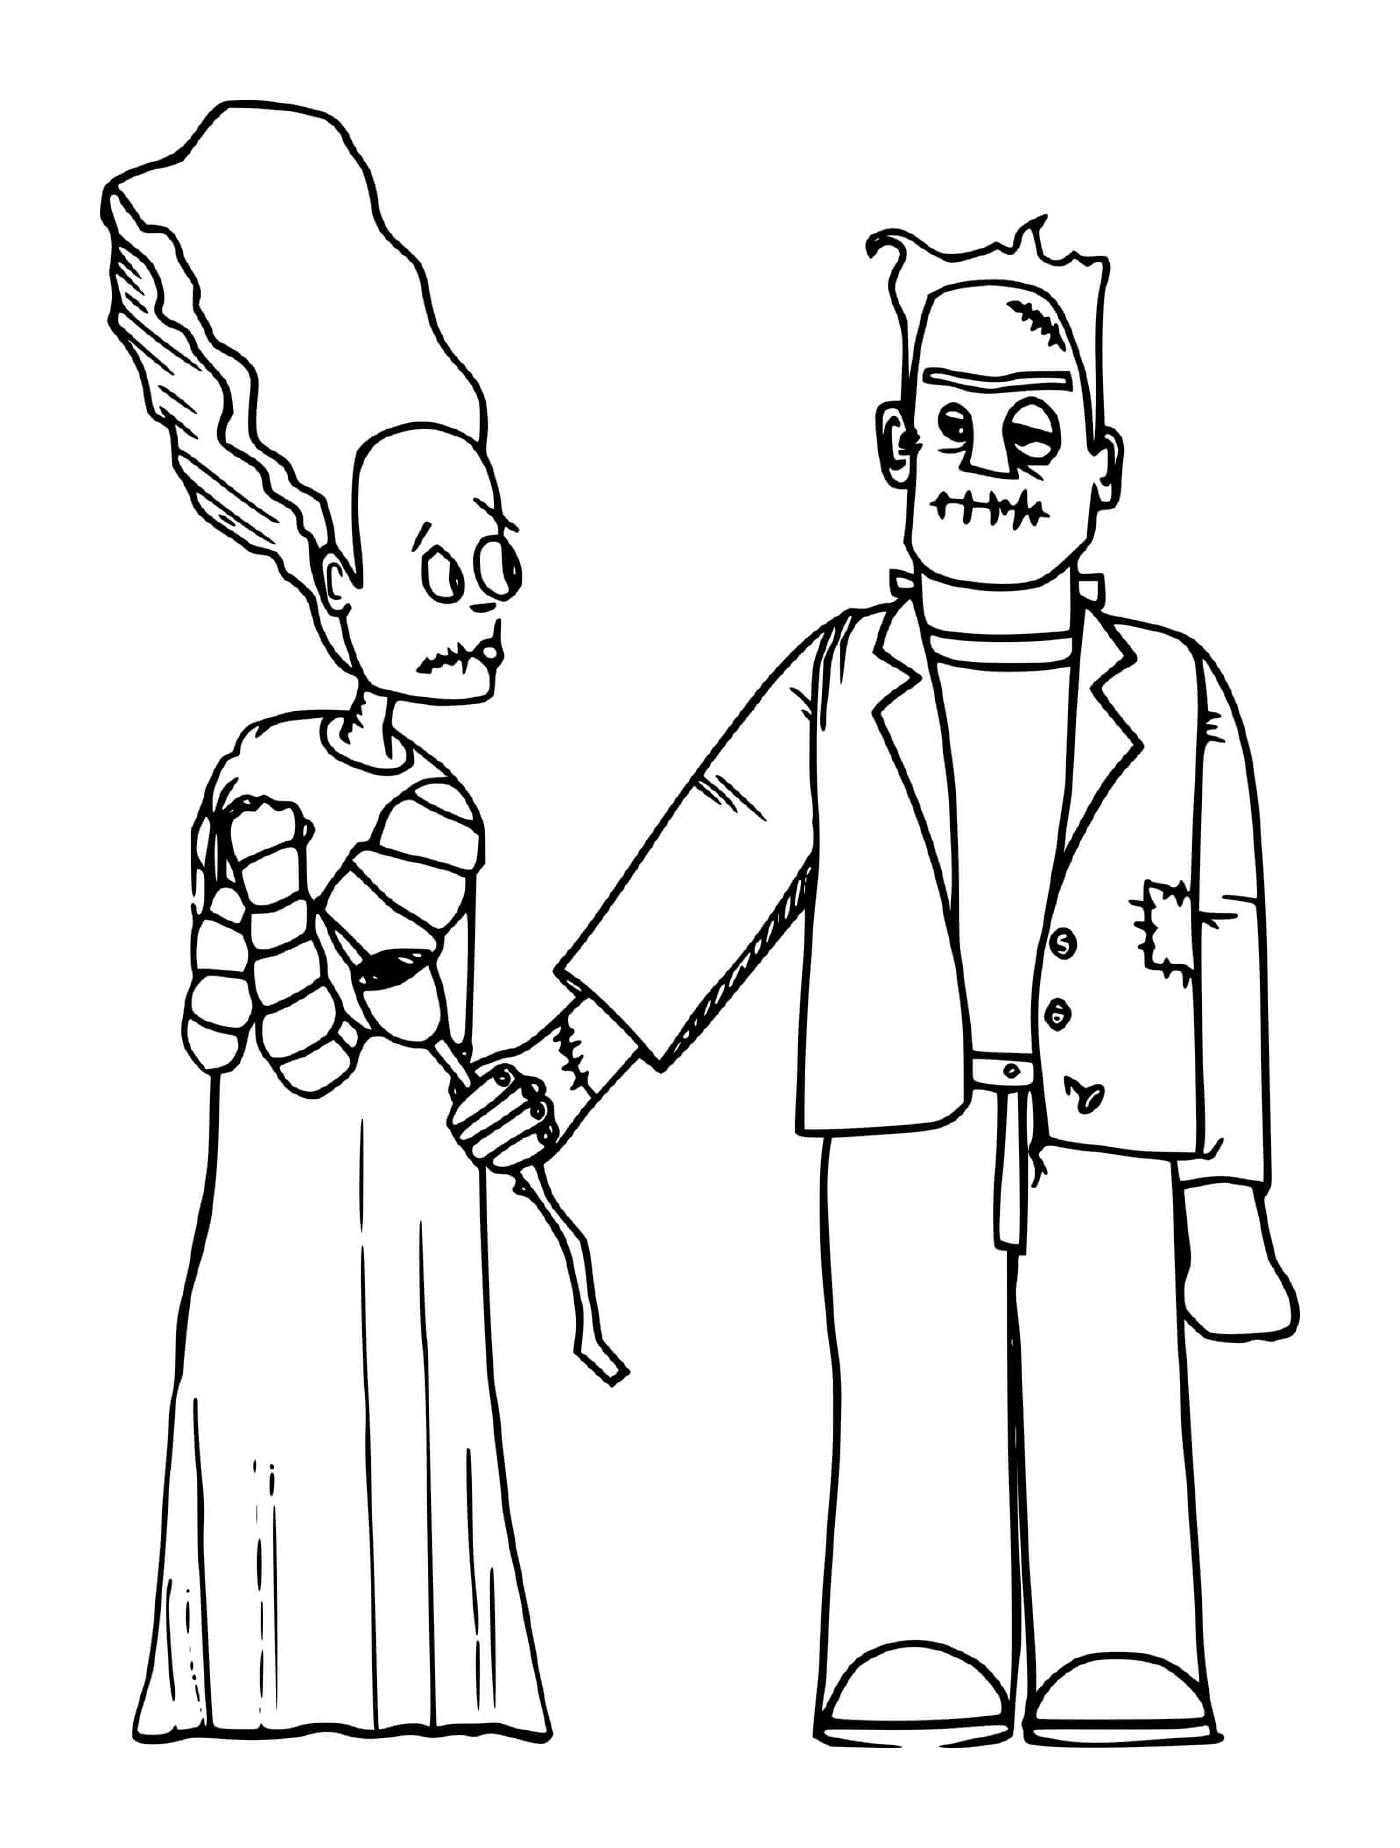  Frankenstein offers a rose to a woman 